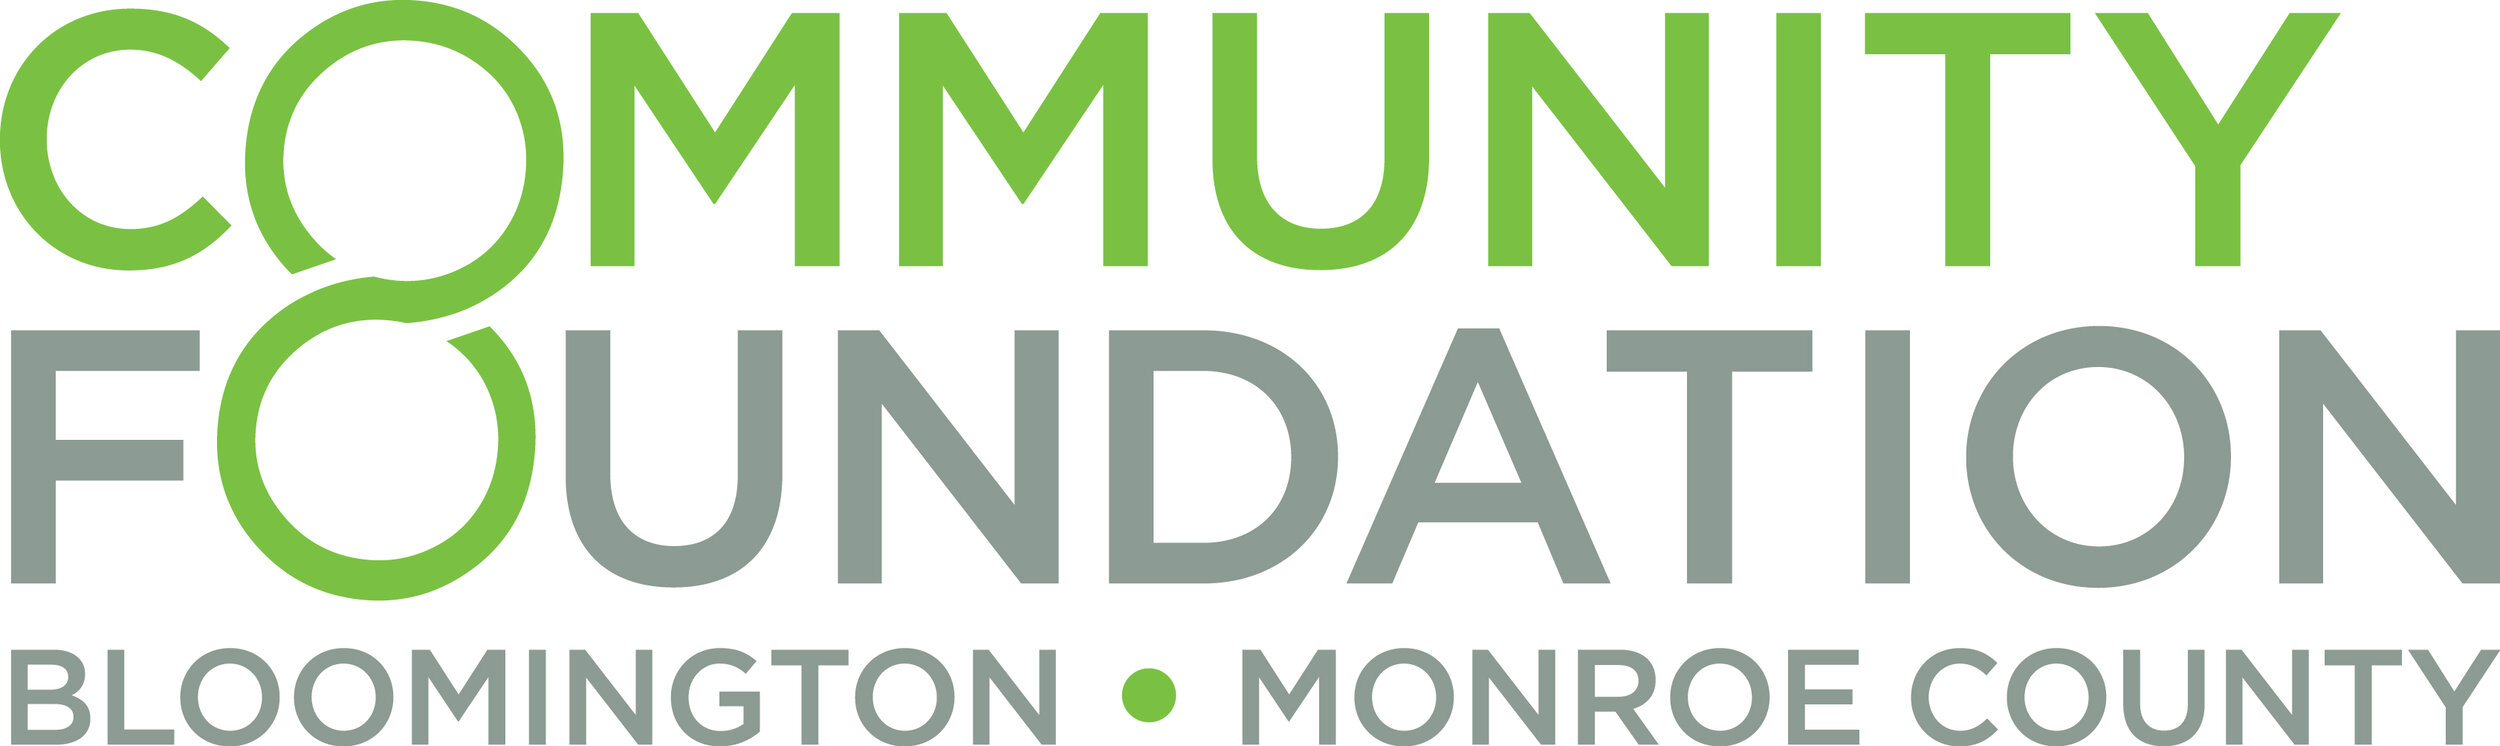 Community Foundation of Bloomington and Monroe County